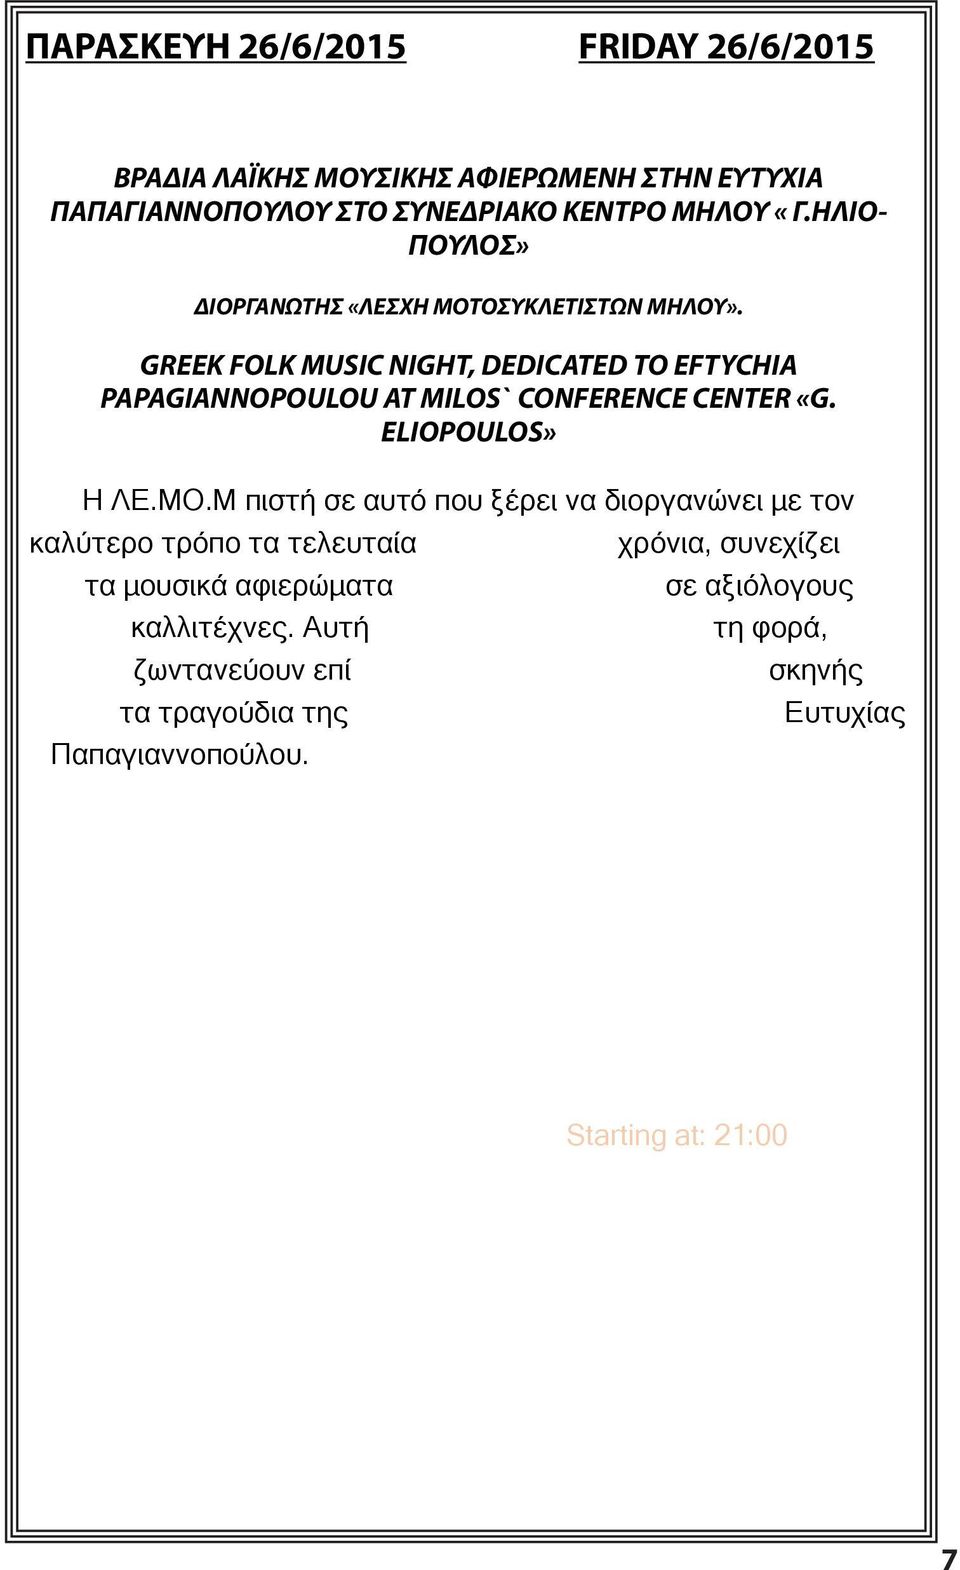 GREEK FOLK MUSIC NIGHT, DEDICATED TO EFTYCHIA PAPAGIANNOPOULOU AT MILOS` CONFERENCE CENTER «G. ELIOPOULOS» Η ΛΕ.ΜΟ.